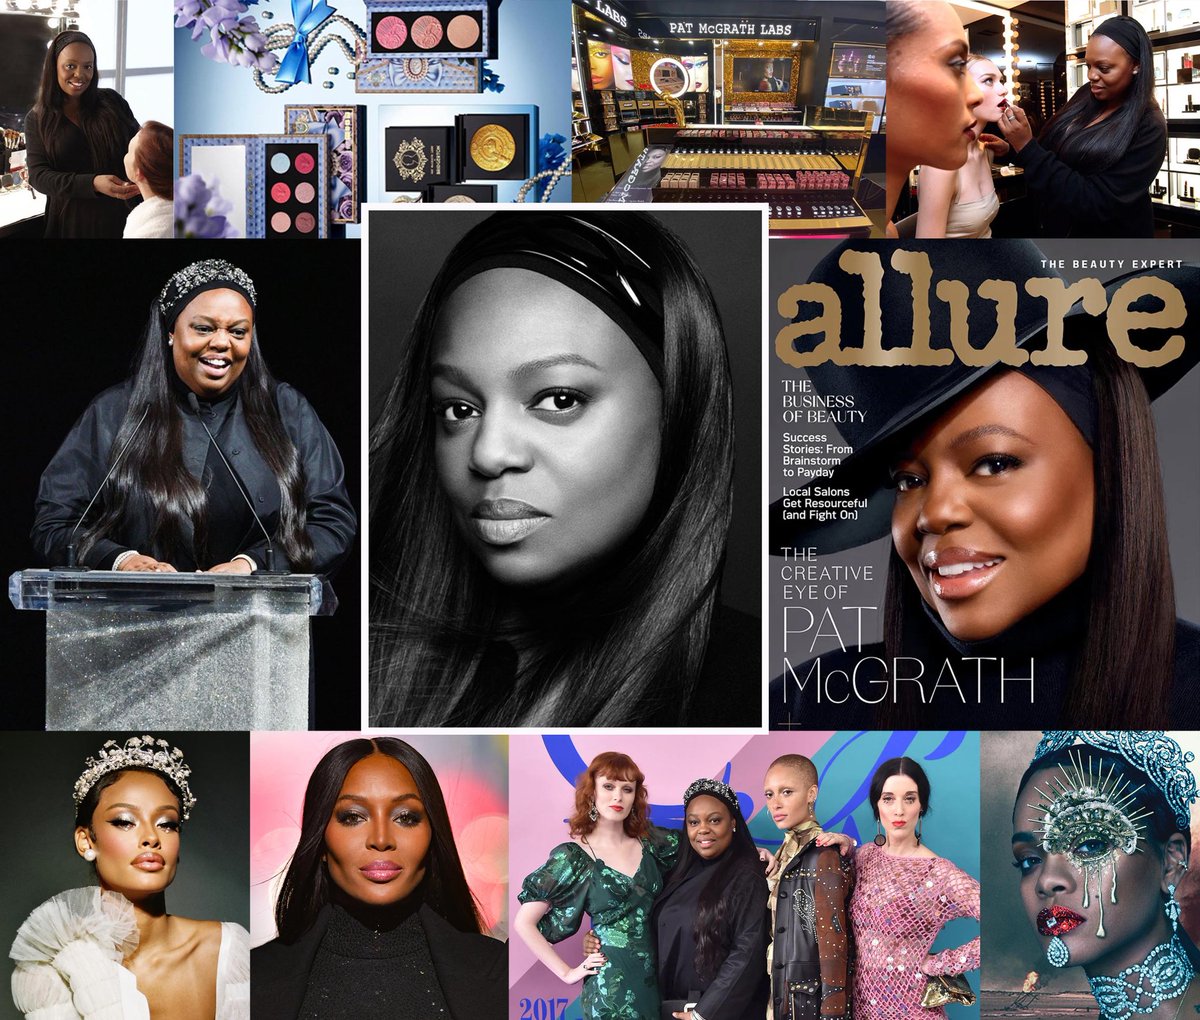 Pat McGrath, “most influential make-up artist in the world”, born 53 years ago on 17 Jun 1970, to #Jamaican parents in Northampton, England. 2018 private-equity firm Eurazeo invested $60 million in Pat McGrath Labs, valuing her beauty brand at $1 billion. 2019 Time Magazine 100…